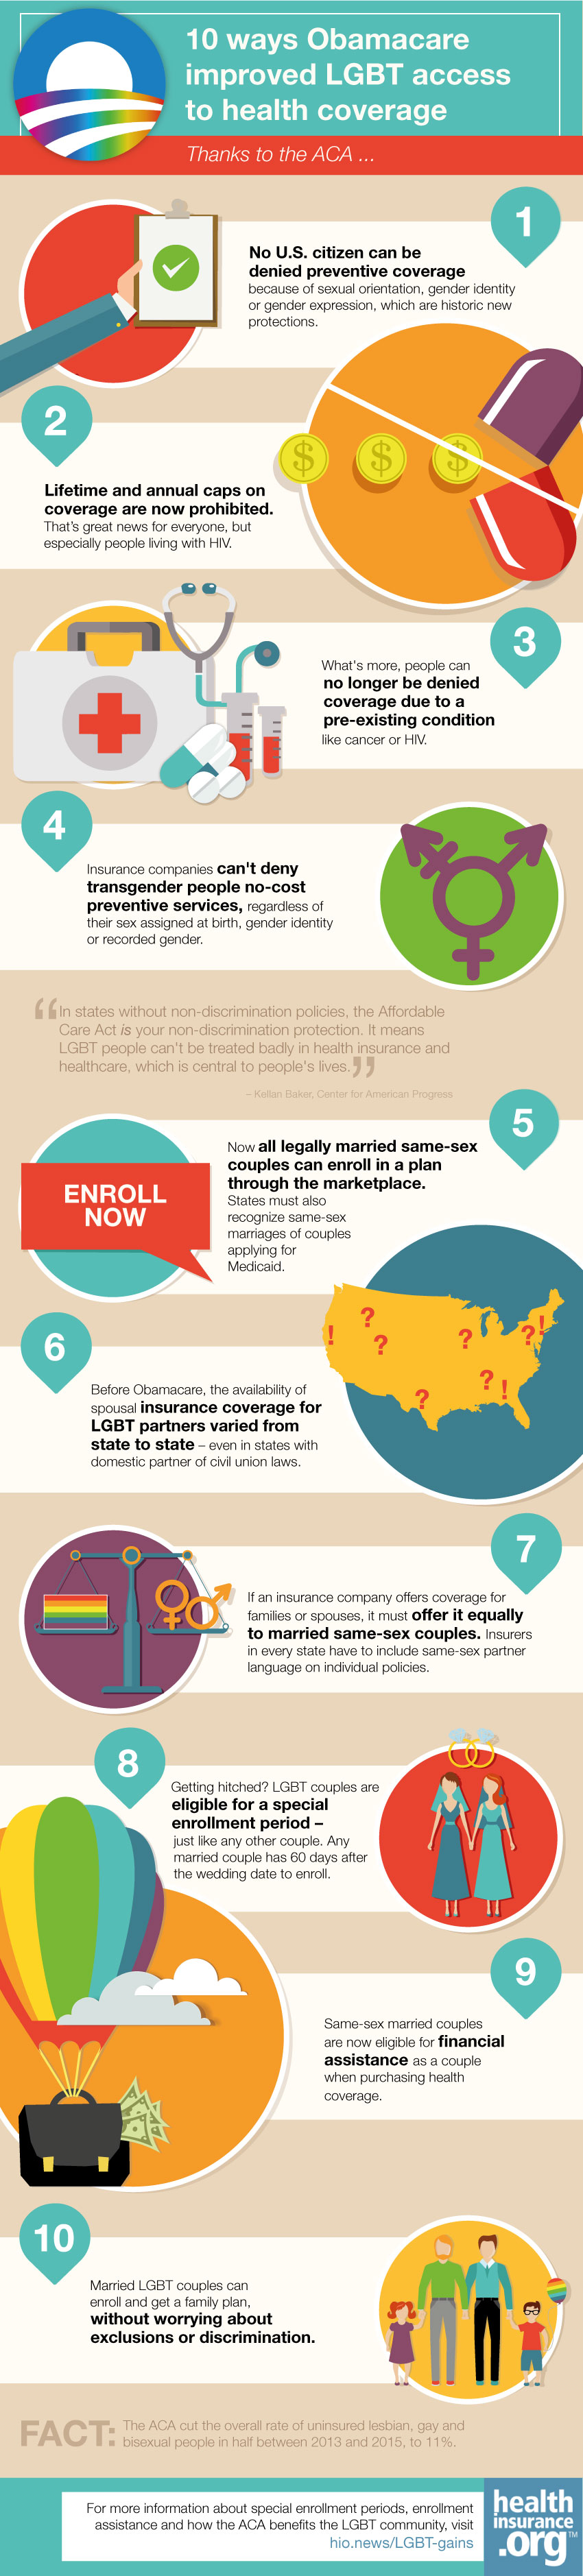 10 Ways Obamacare Improved LGBT Access to Health Coverage